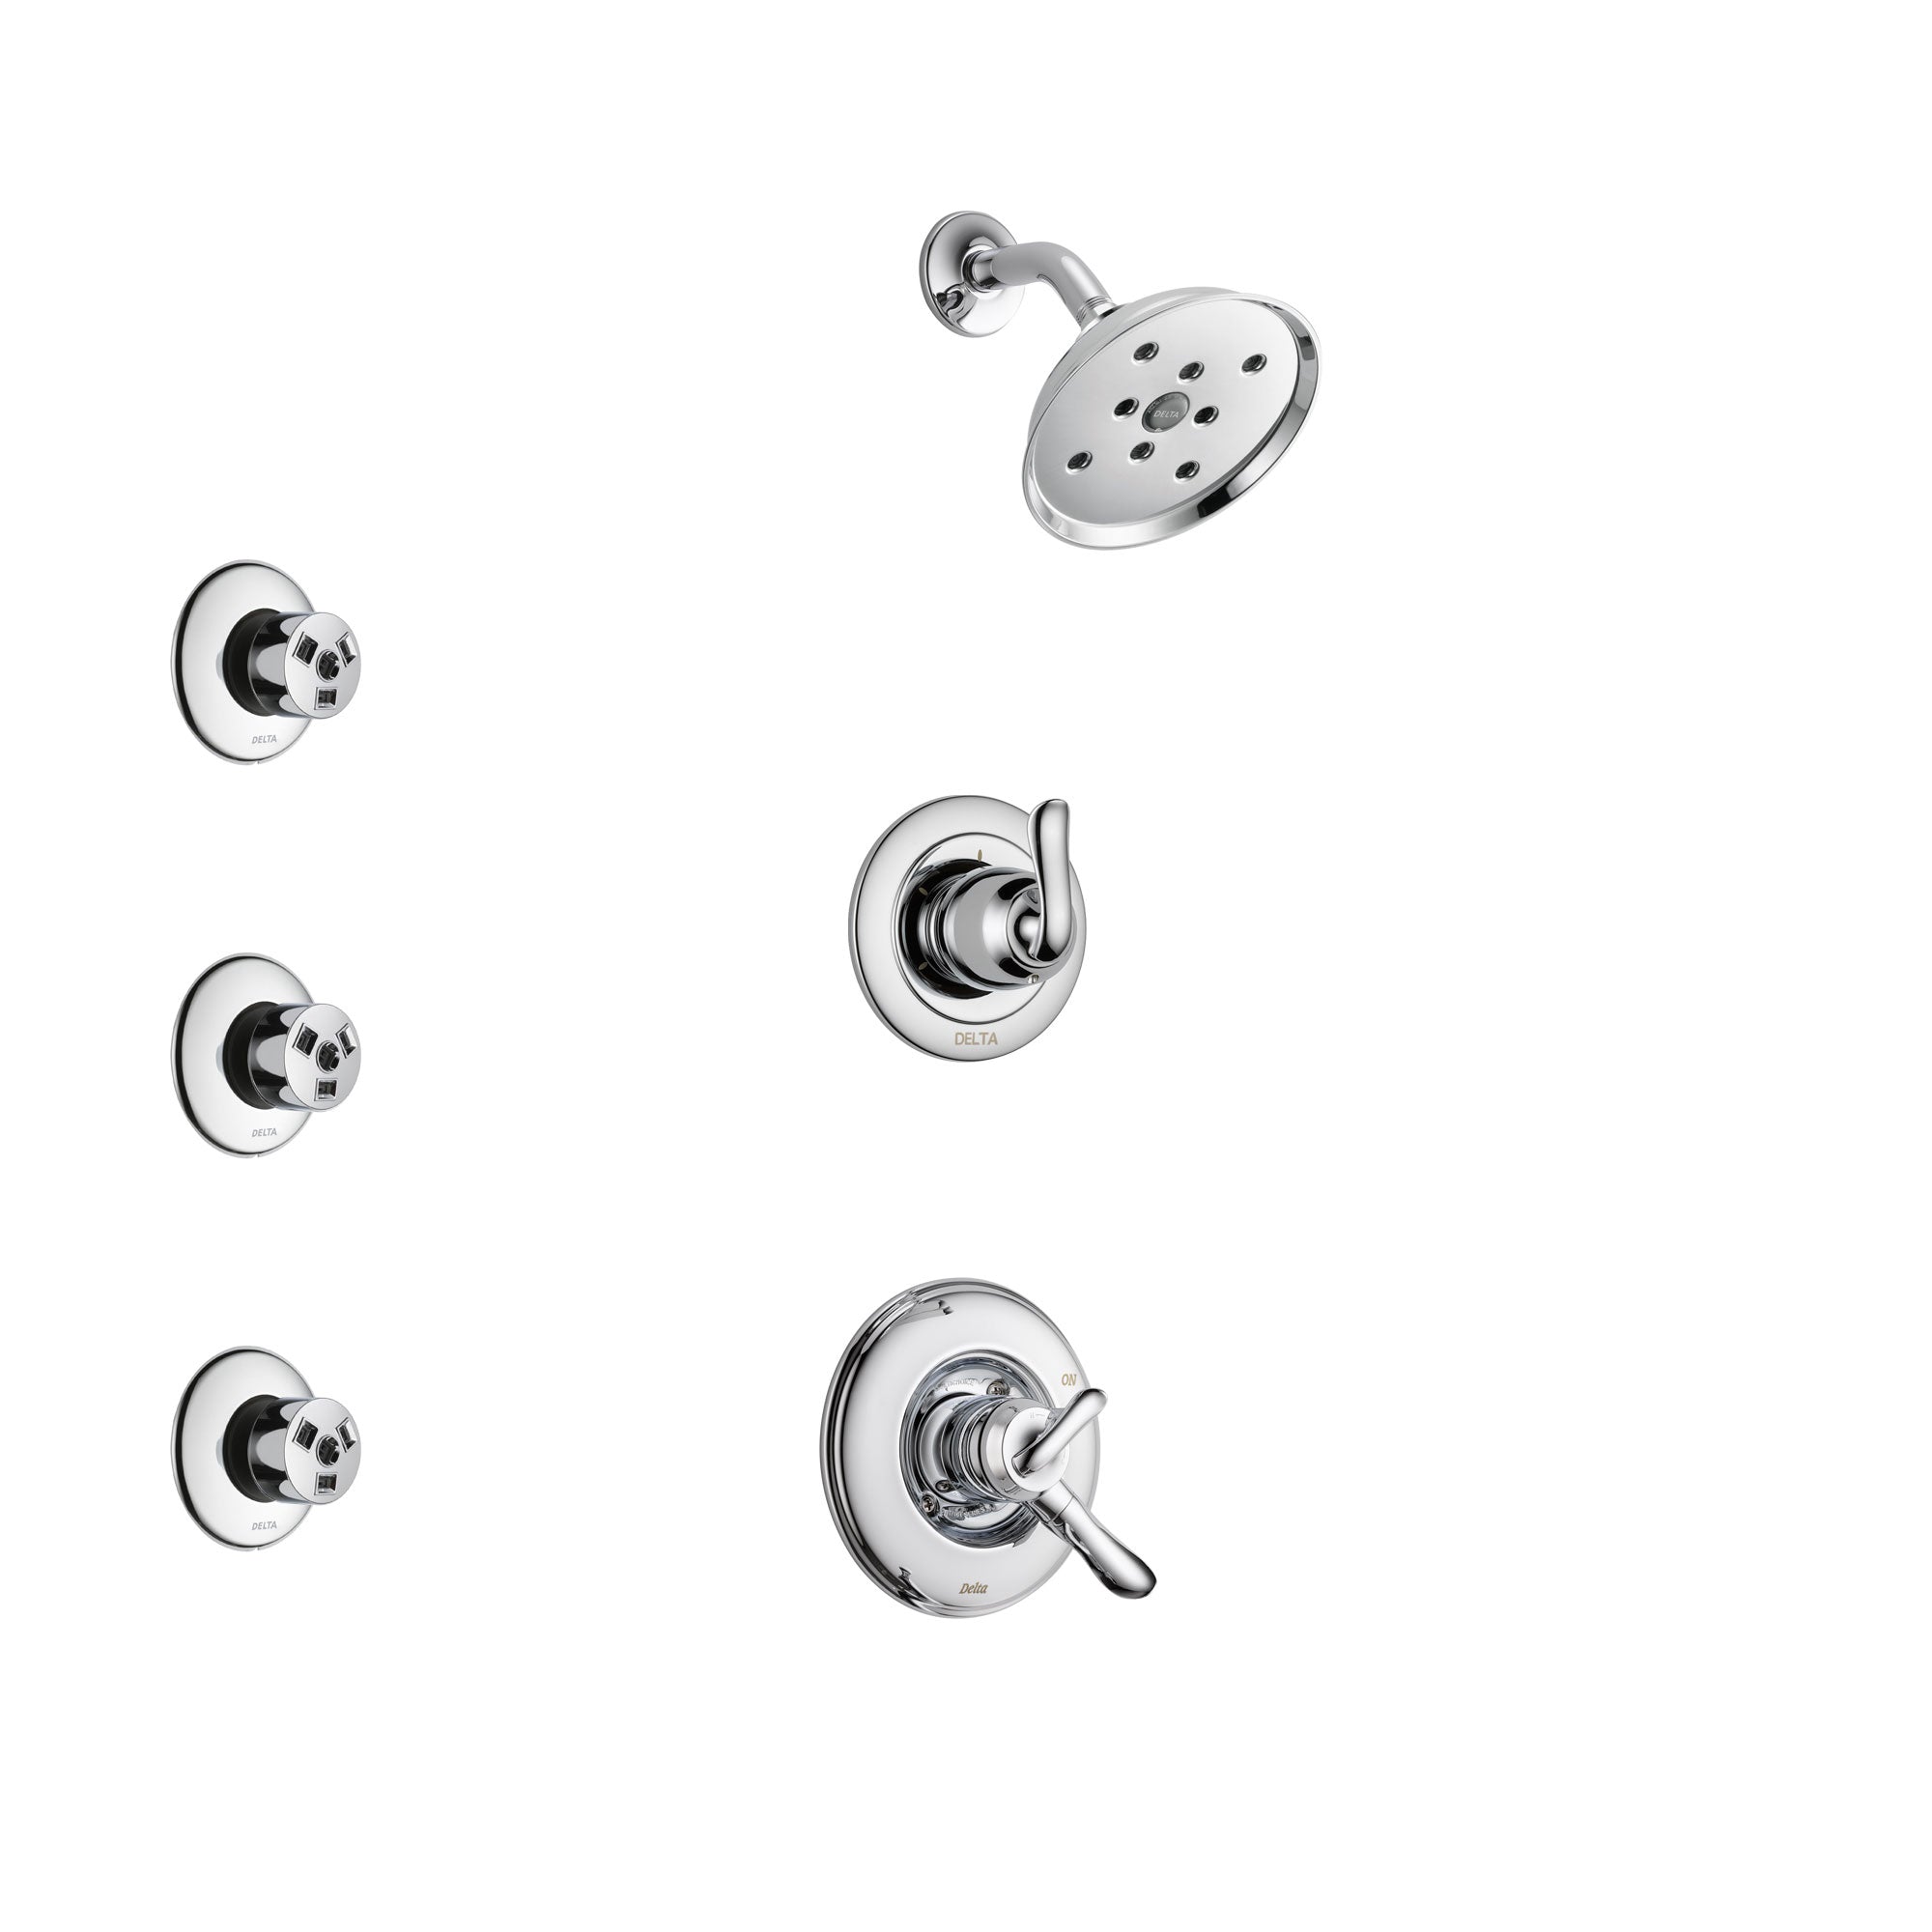 Delta Linden Chrome Finish Shower System with Dual Control Handle, 3-Setting Diverter, Showerhead, and 3 Body Sprays SS172942